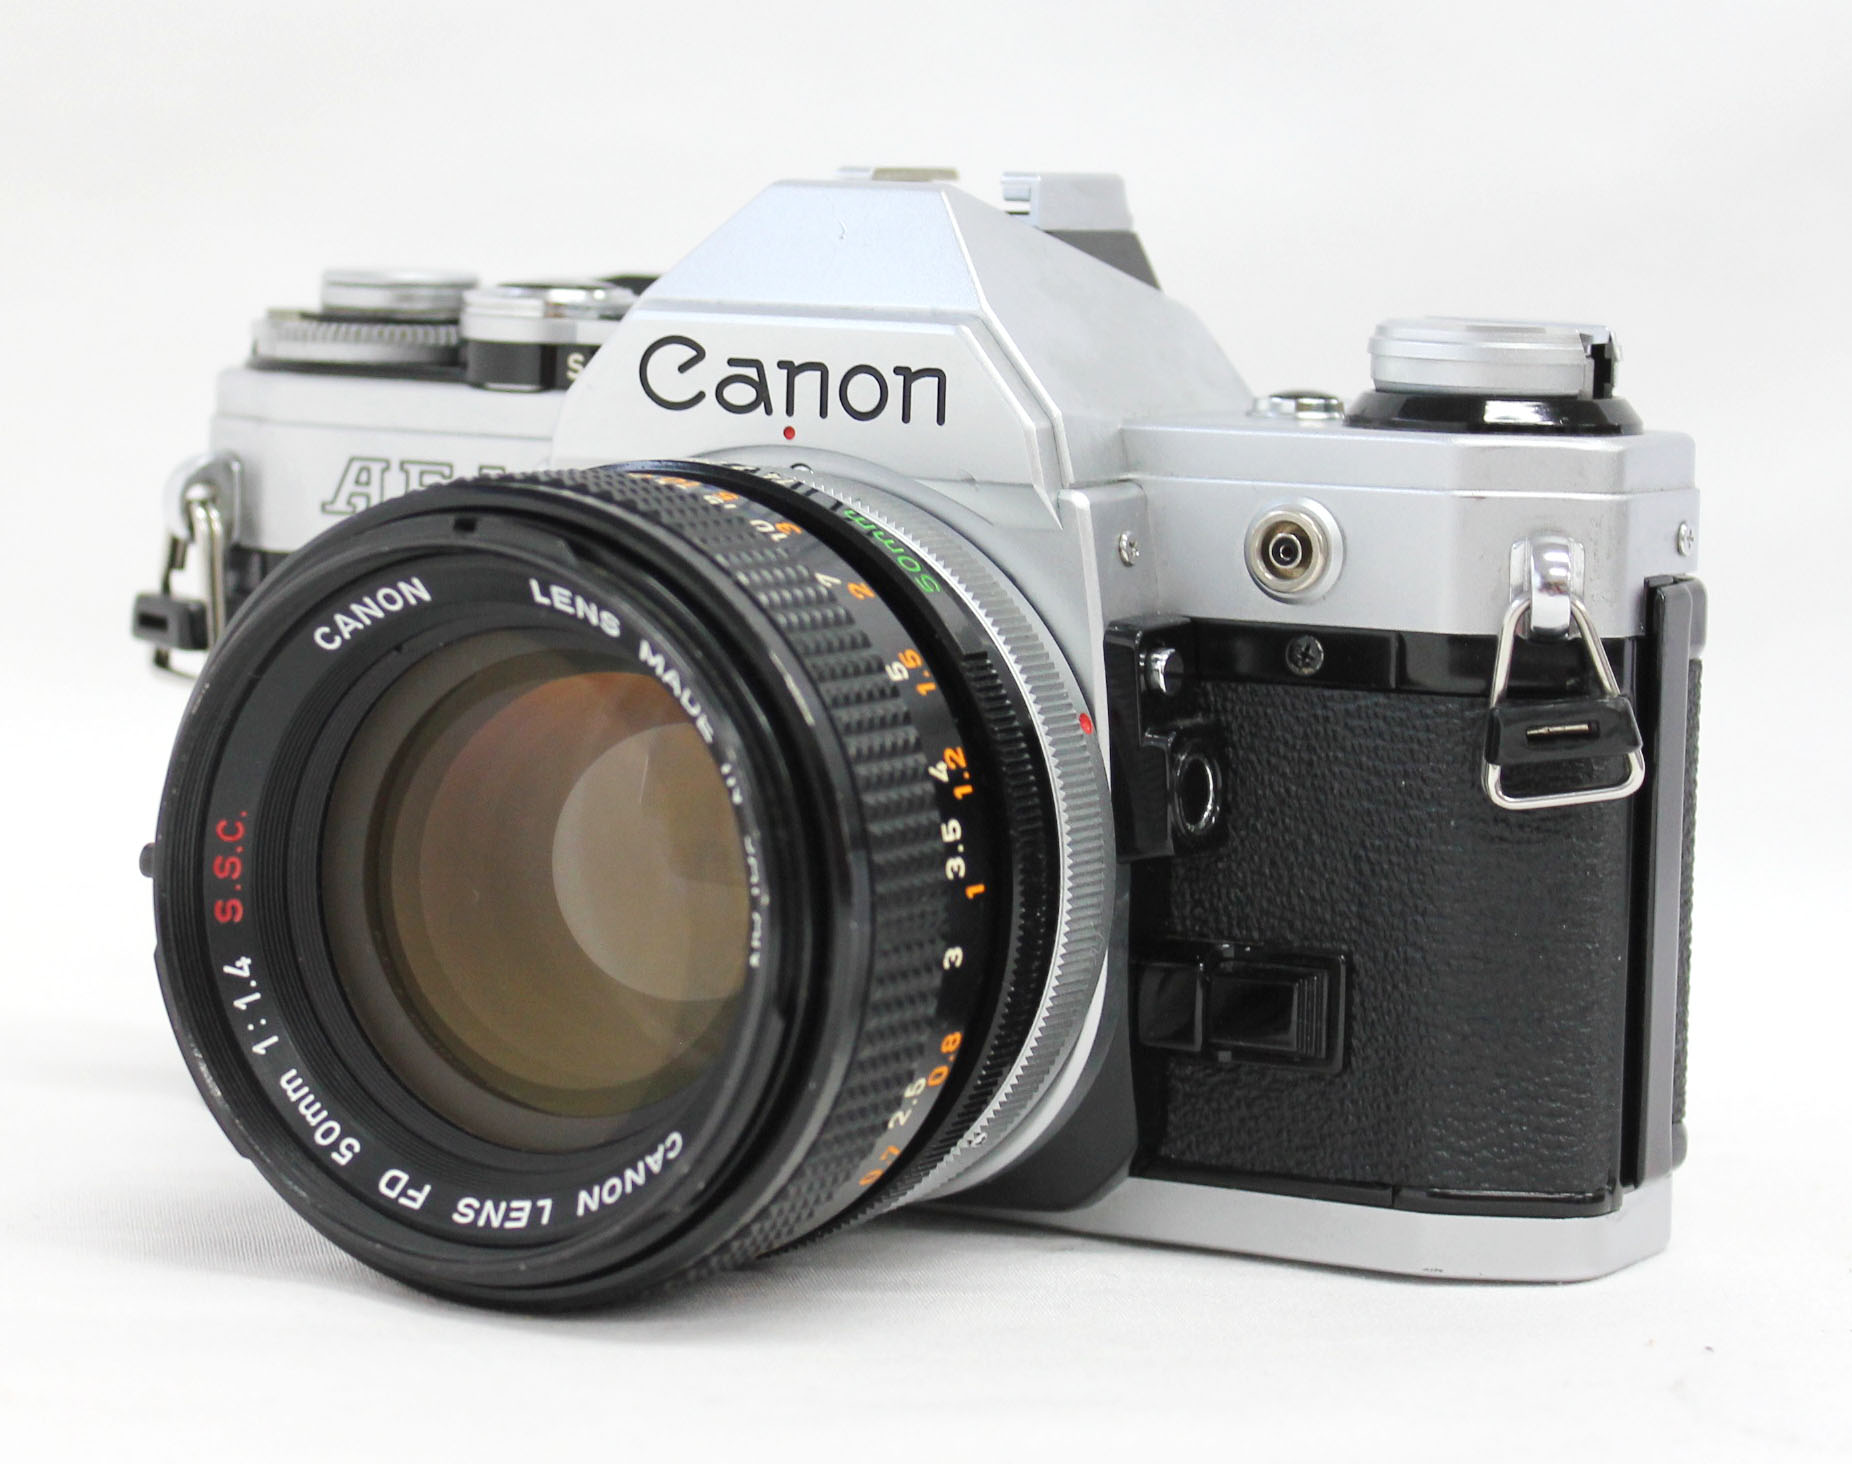 Japan Used Camera Shop | Canon AE-1 35mm SLR Camera with FD 50mm F/1.4 S.S.C. Lens from Japan